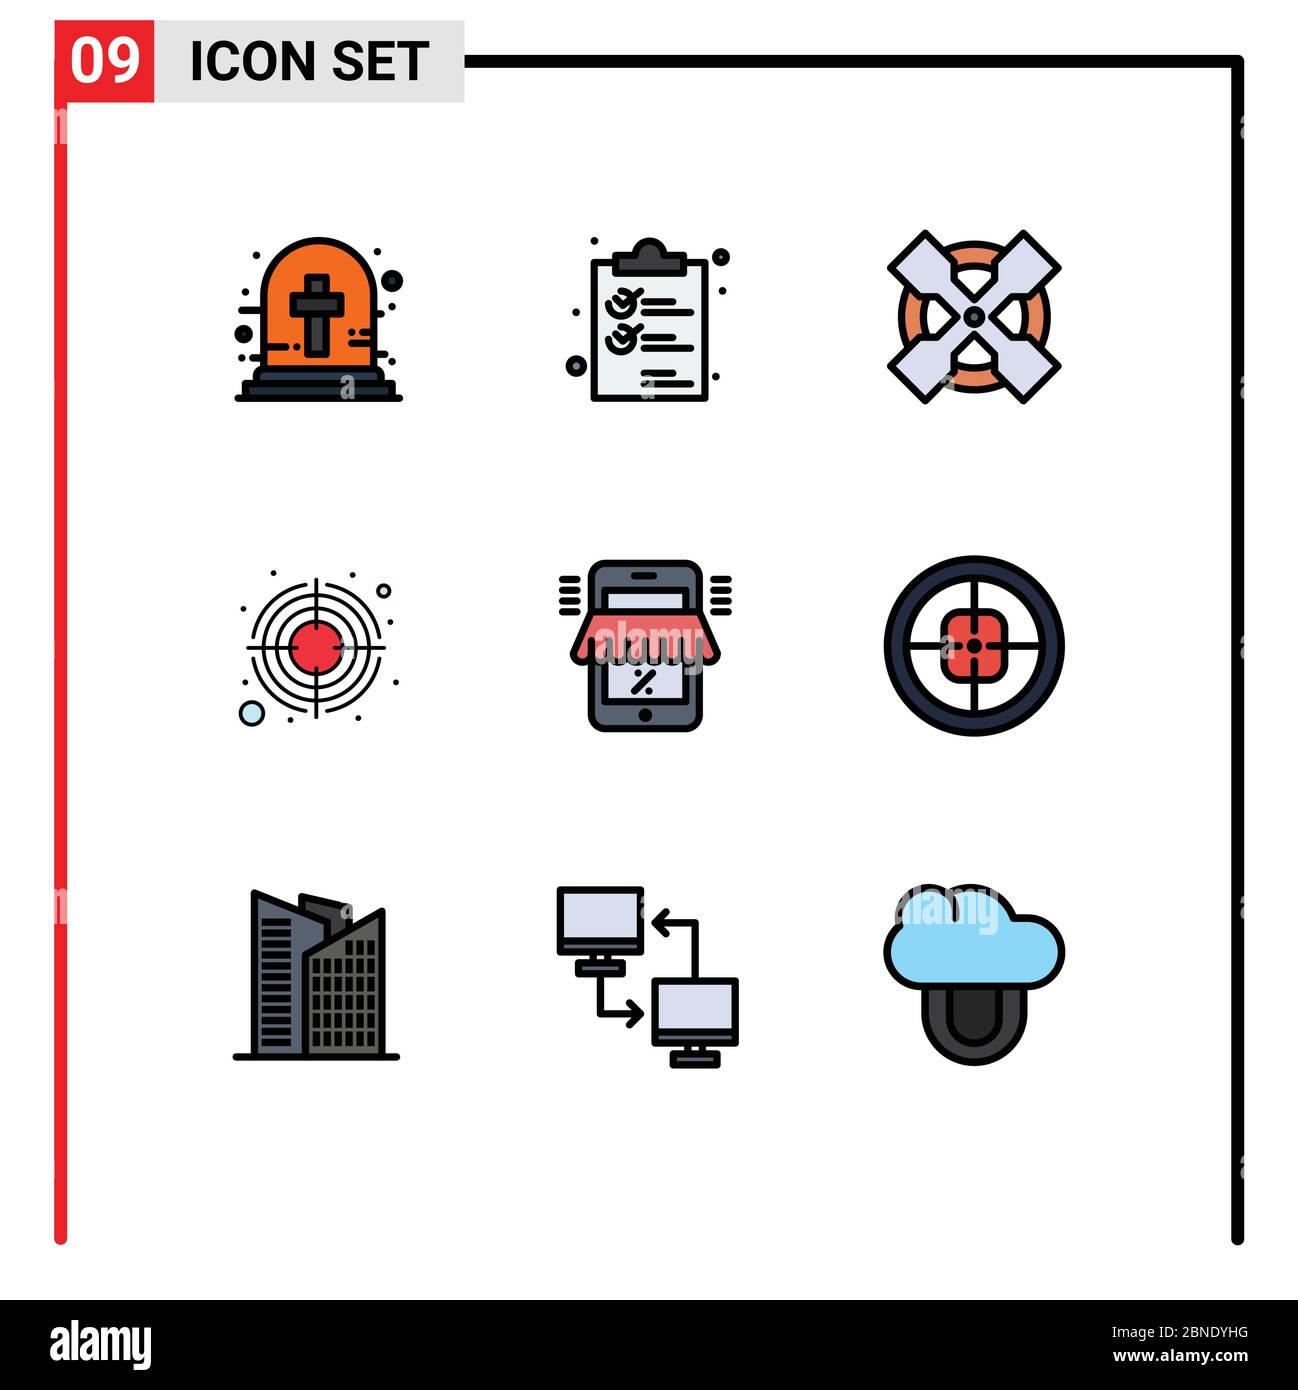 Set of 9 Modern UI Icons Symbols Signs for online, target, shopping, goal, focus Editable Vector Design Elements Stock Vector